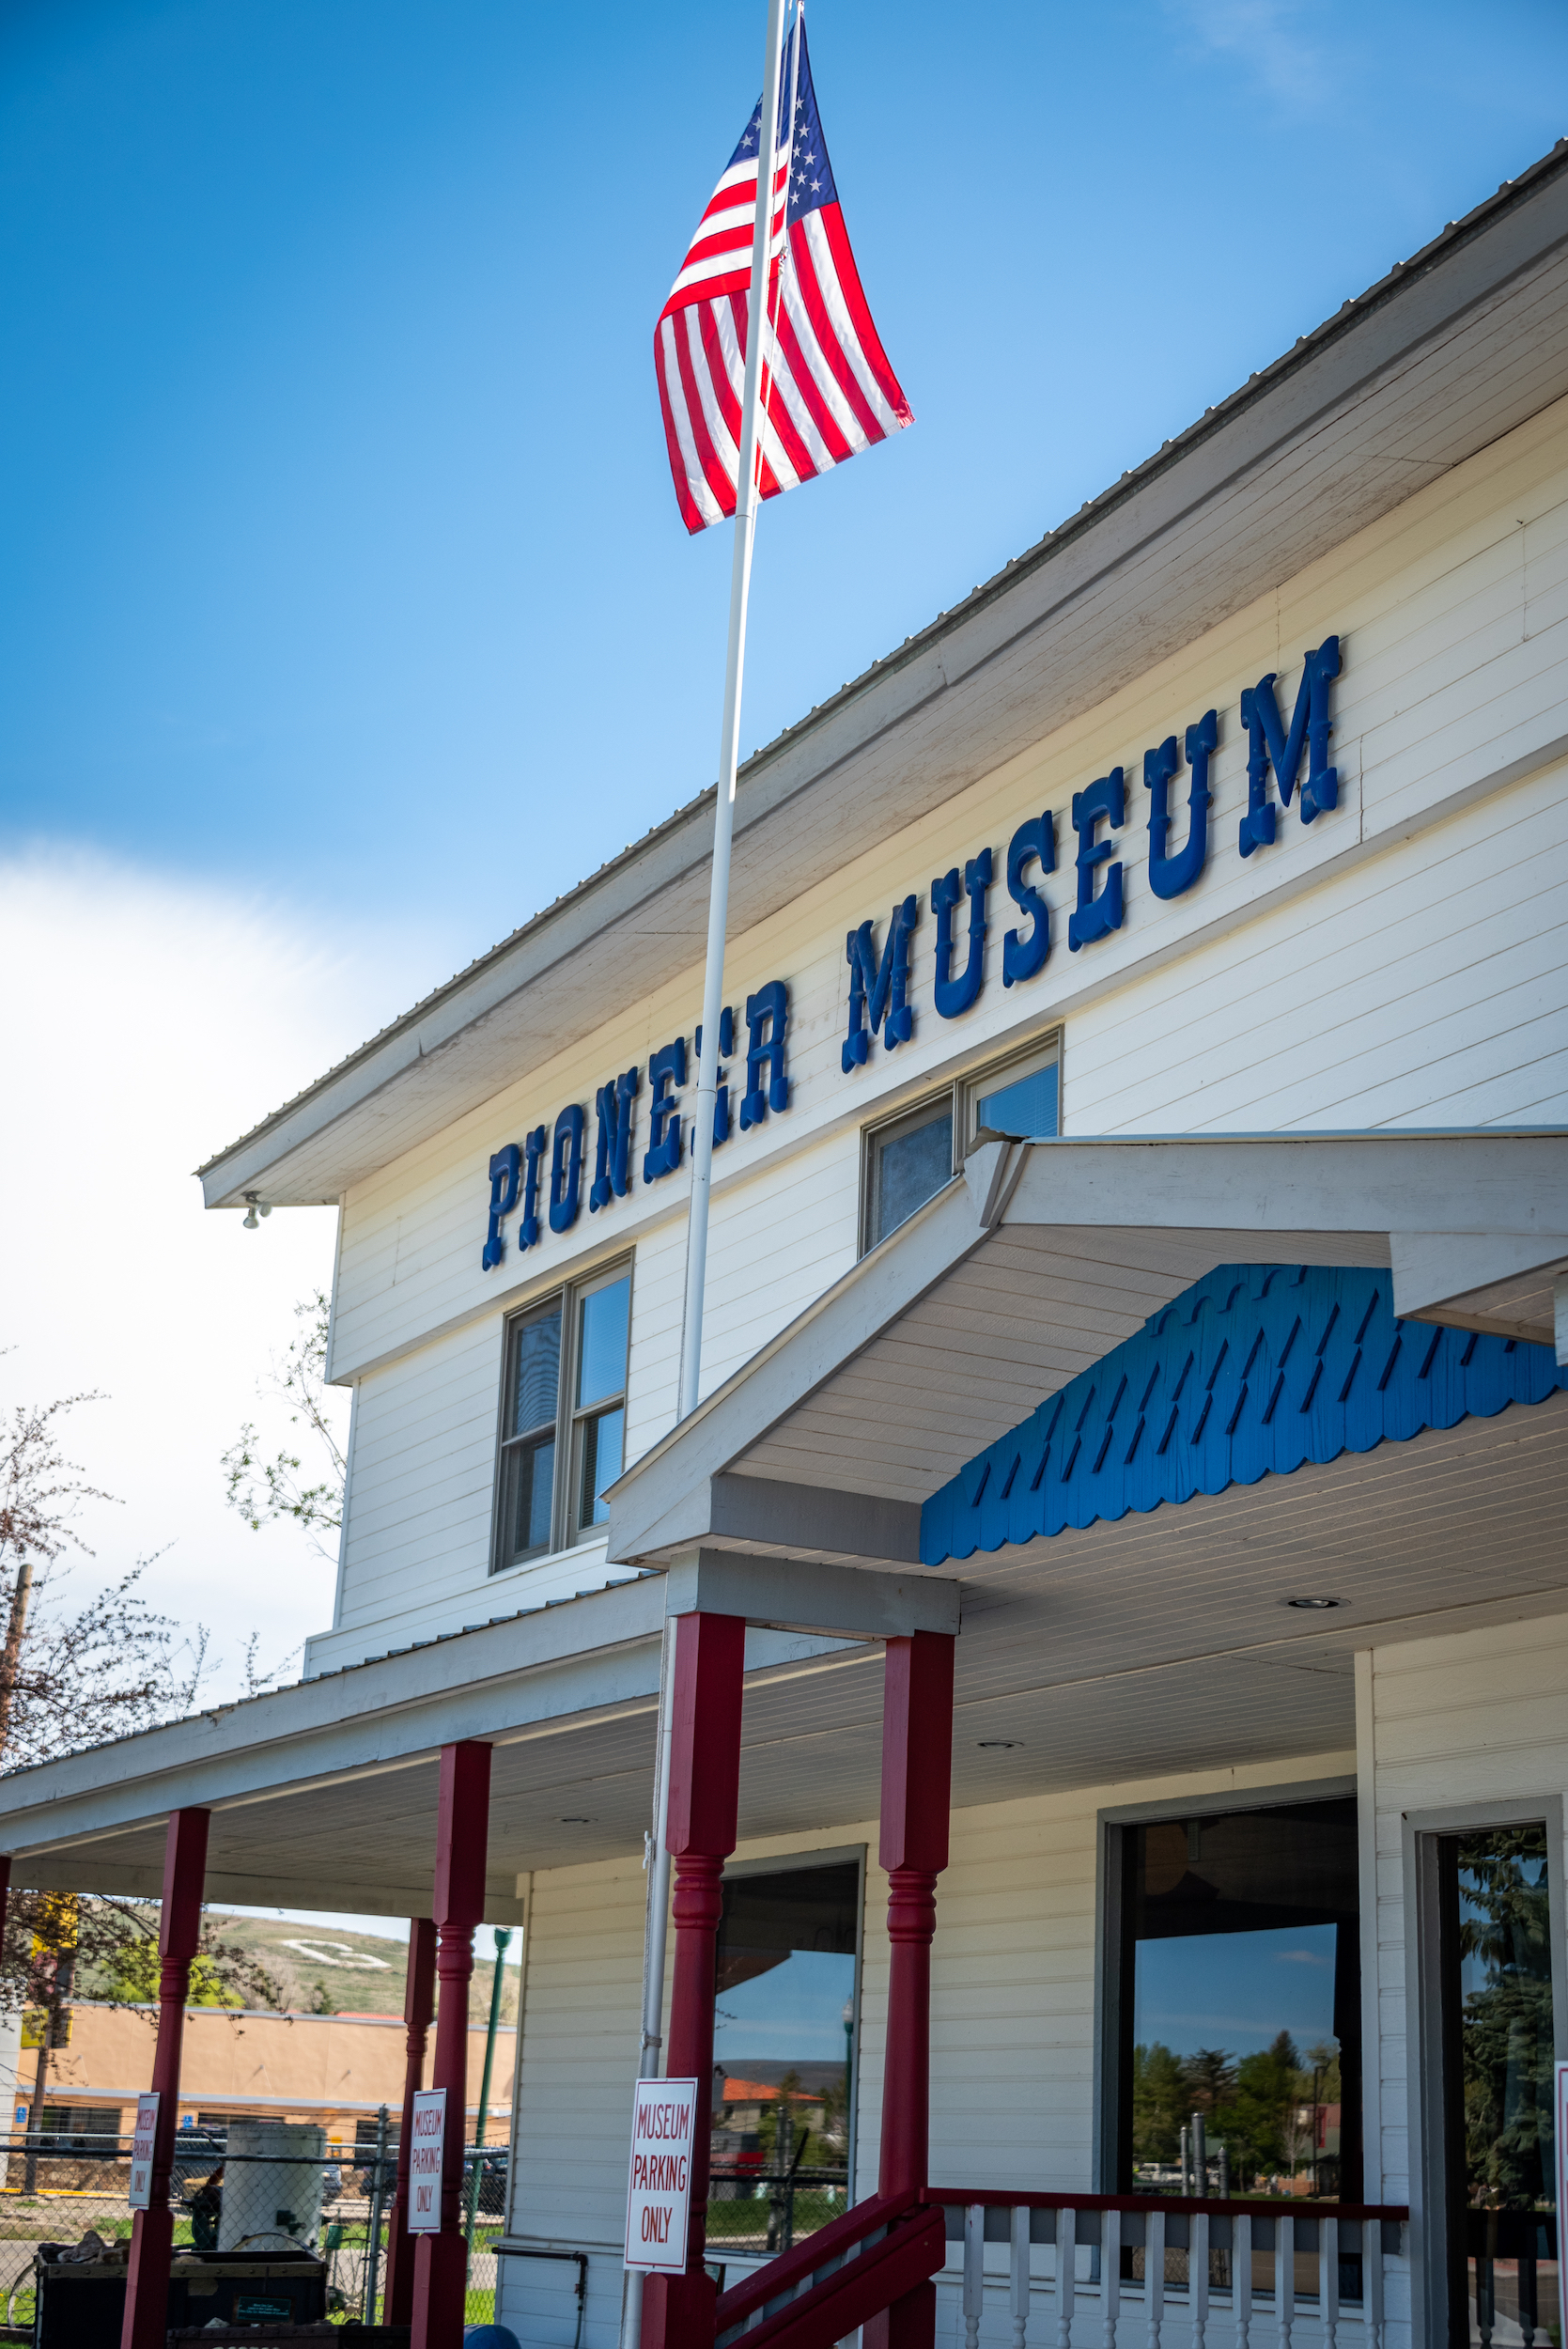 The front of a building with the words "Pioneer Museum" and a flag pole with a red, white, and blue flag.